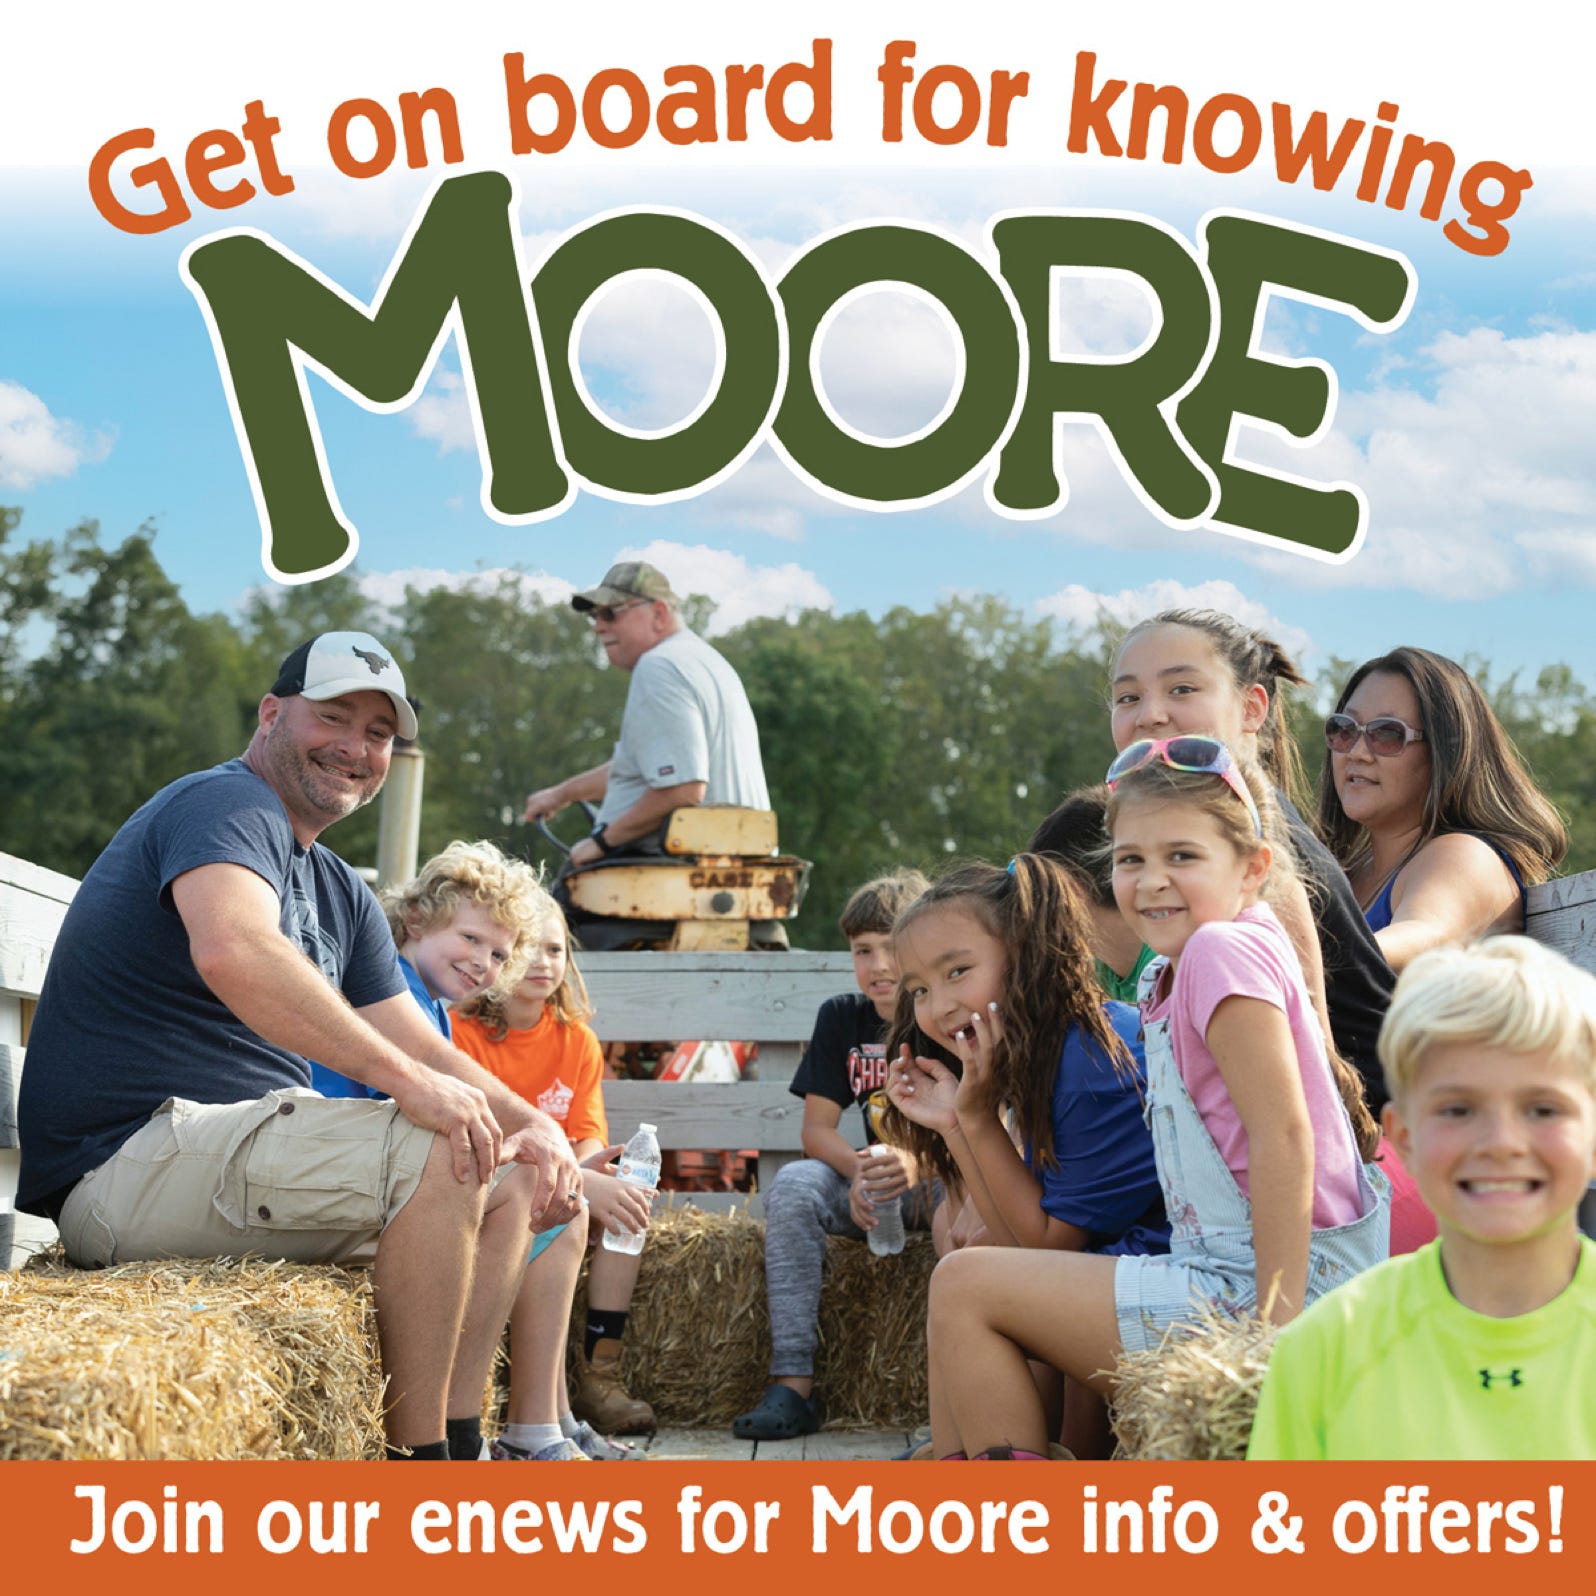 Sign up to Moore Family Farm Enews for info & offers